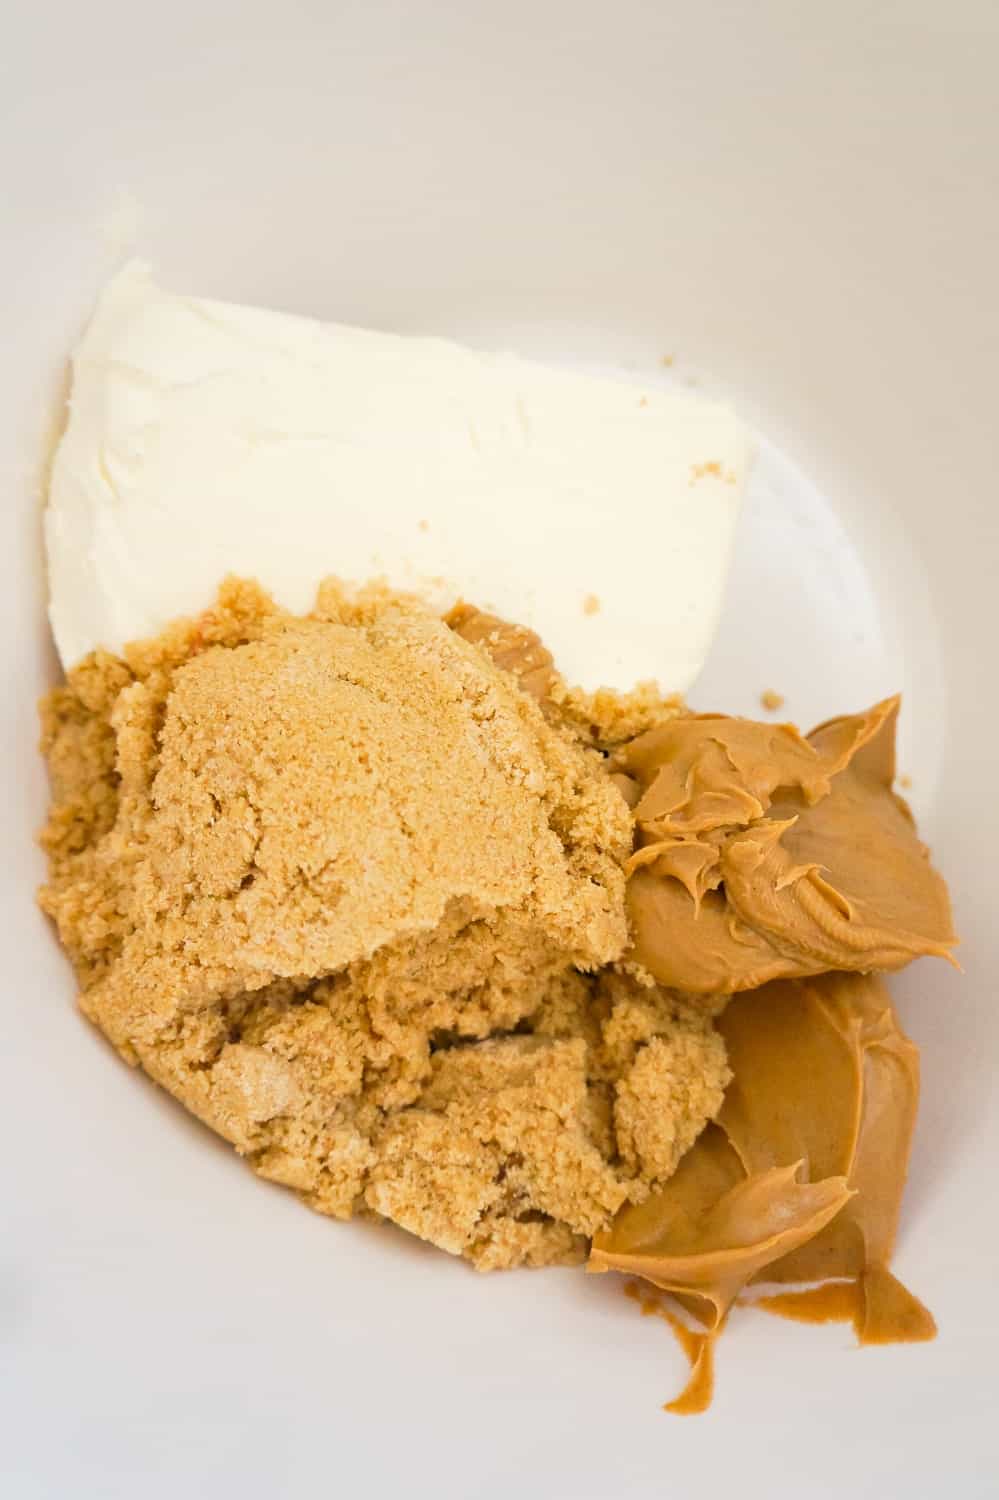 cream cheese, light brown sugar and smooth peanut butter in a mixing bowl